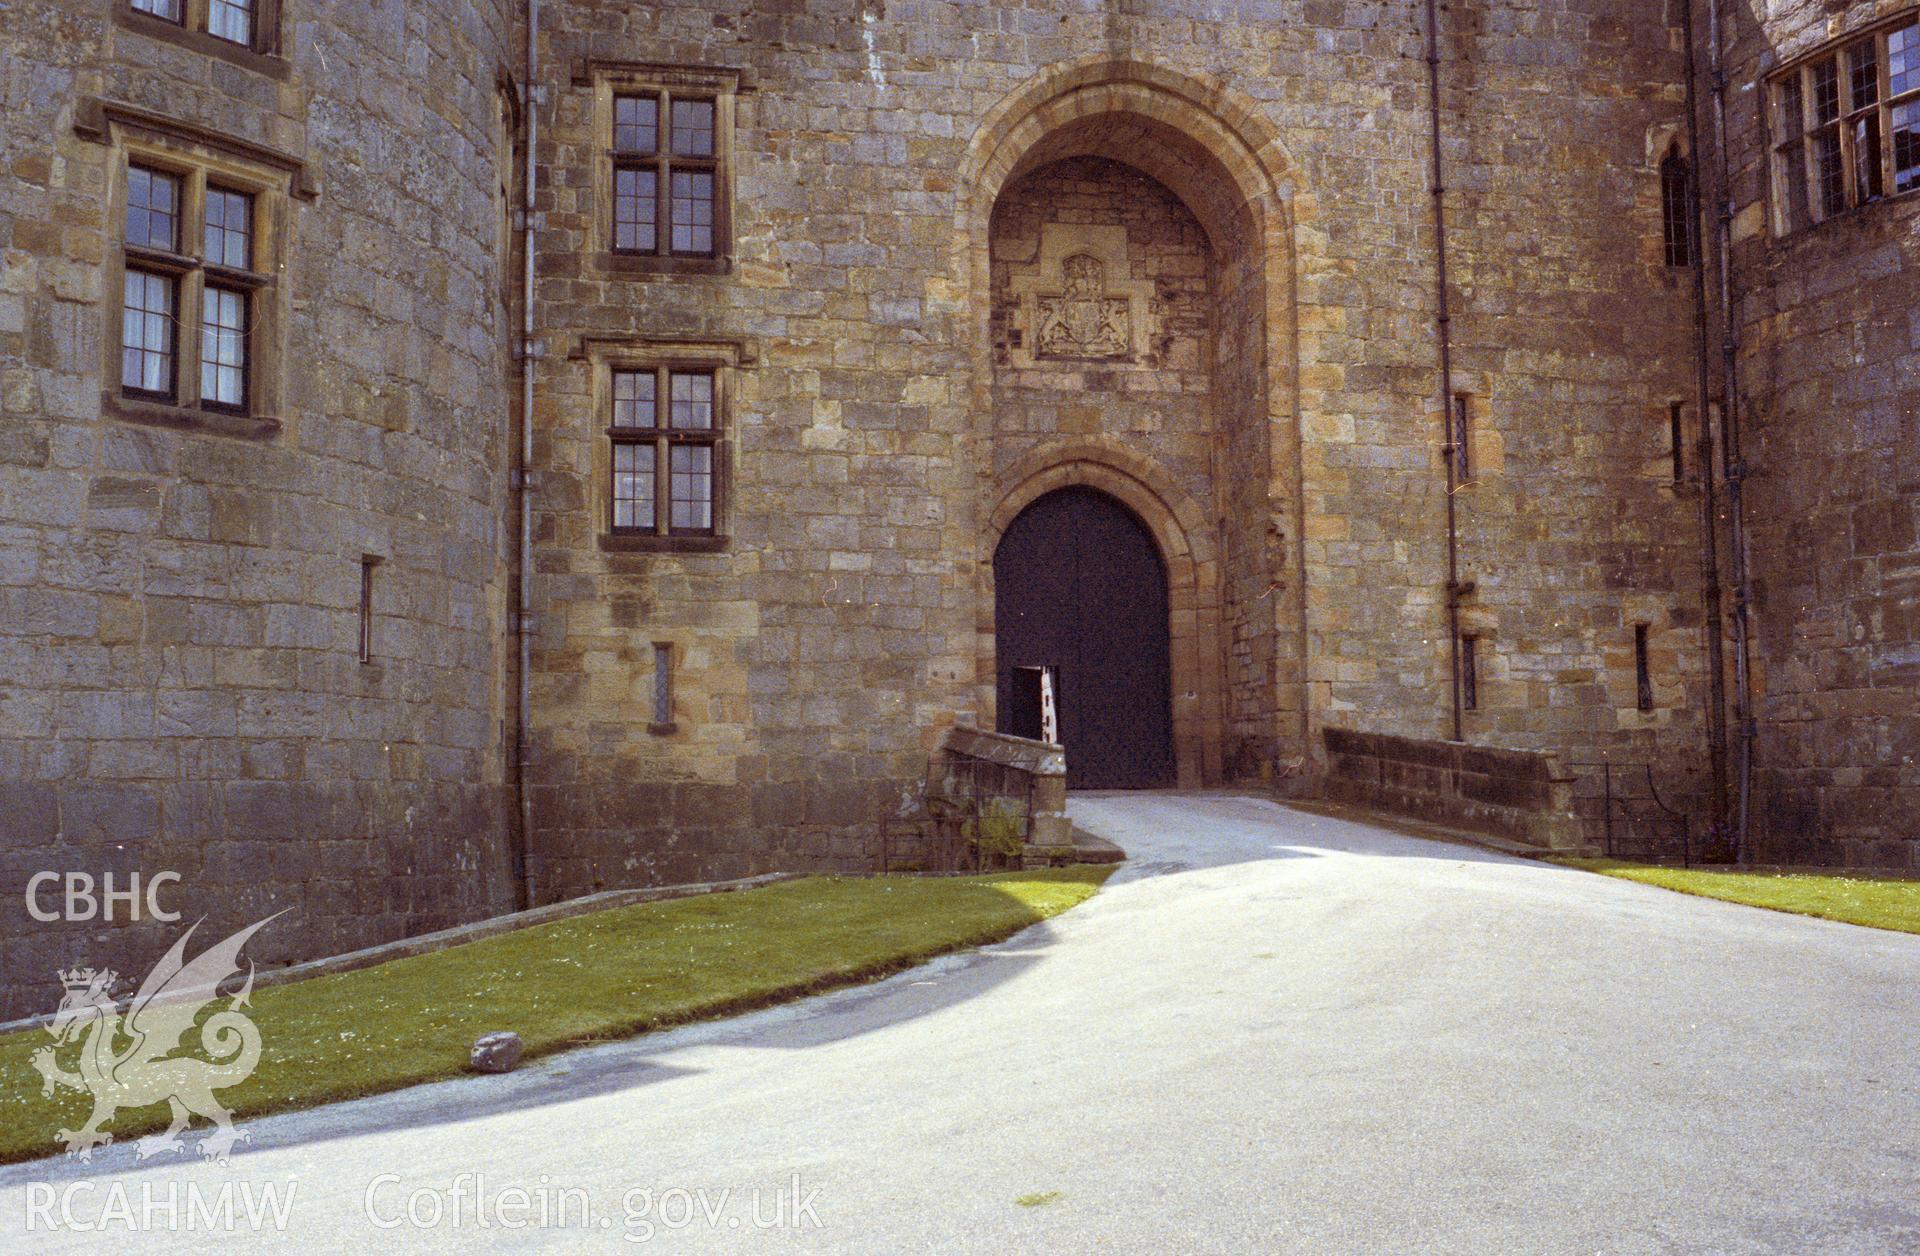 Exterior view of Chirk Castle collated by the former Central Office of Information.